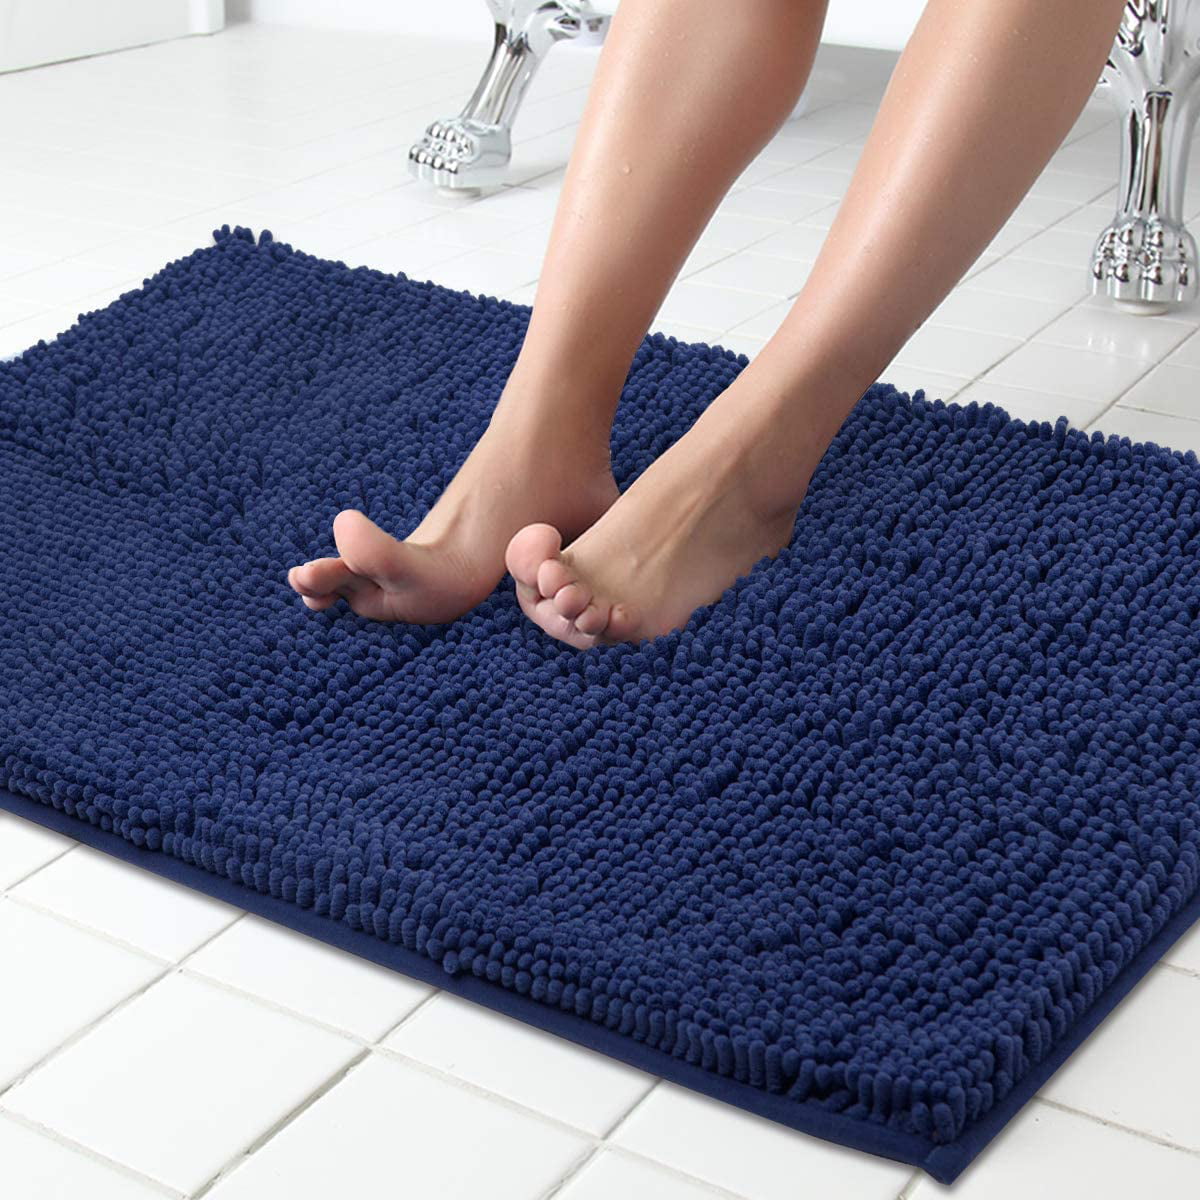 Dropship Non Slip Chenille Bath Mat For Bathroom Rugs 50 X 80; Extra Soft  And Absorbent Microfiber Shag Rug; Machine Wash Dry; Shower; And Room- Dark  Gray to Sell Online at a